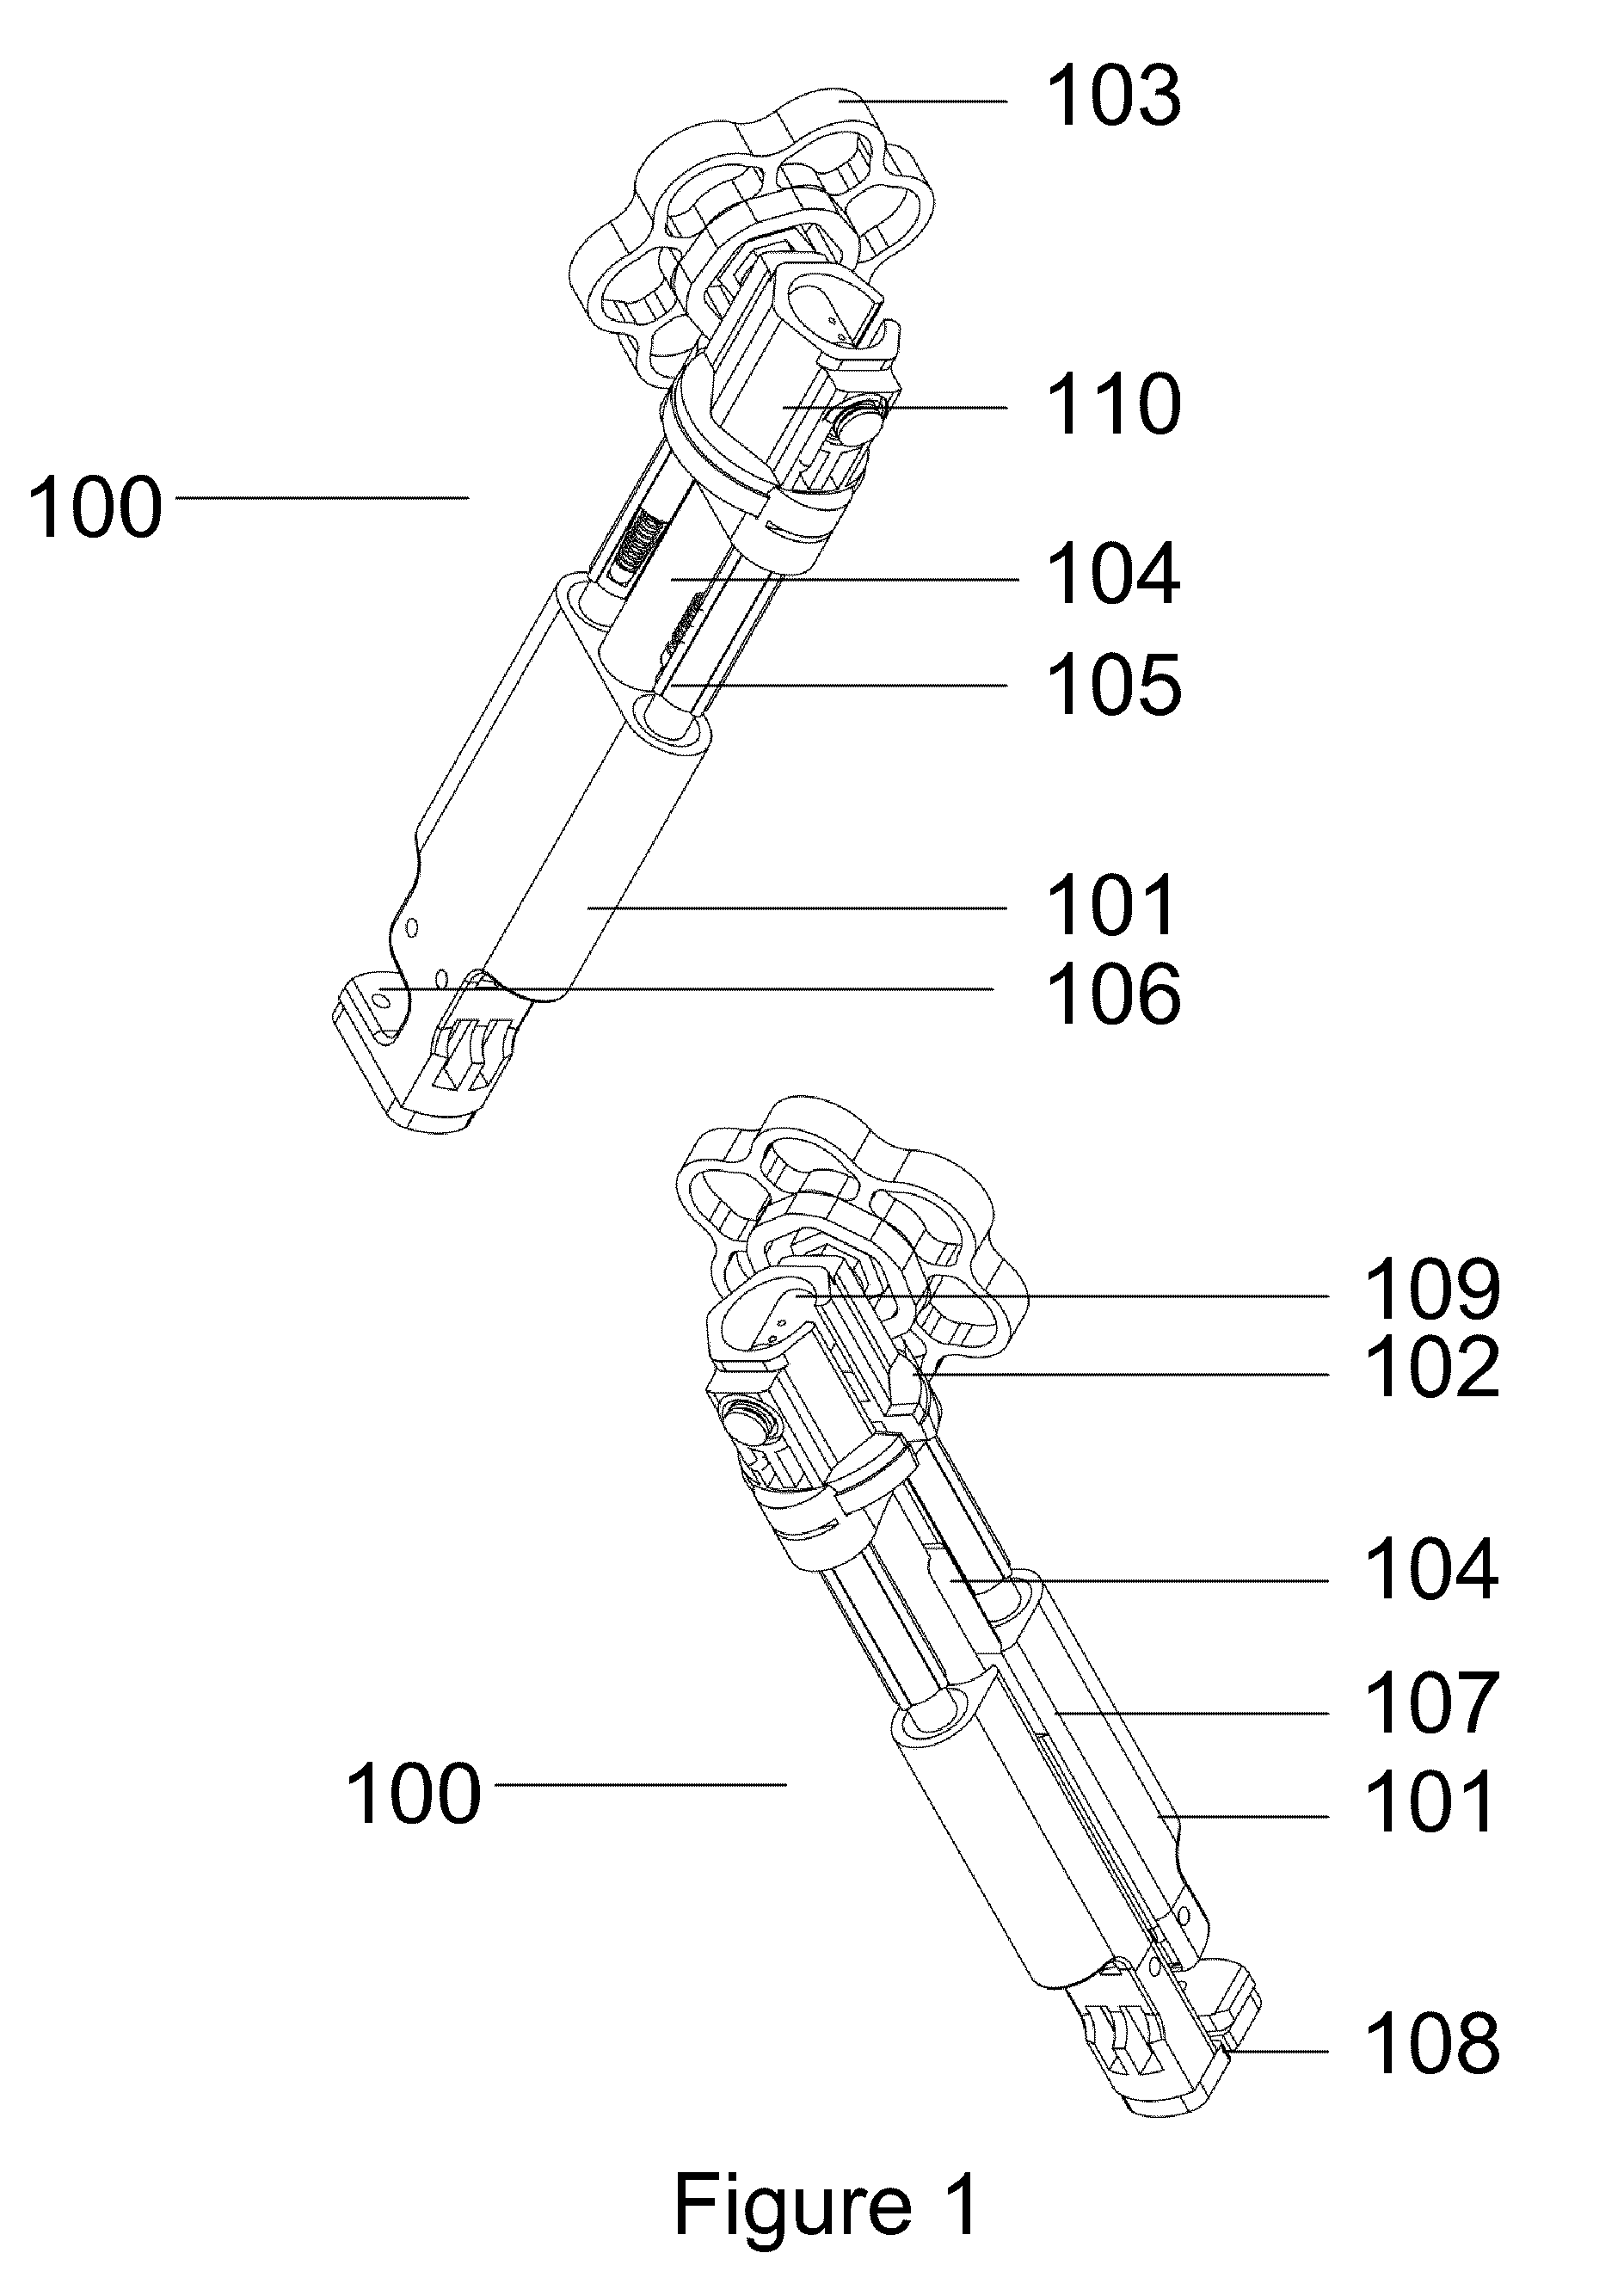 Surgical Instrument and Method for Tensioning and Securing a Flexible Suture